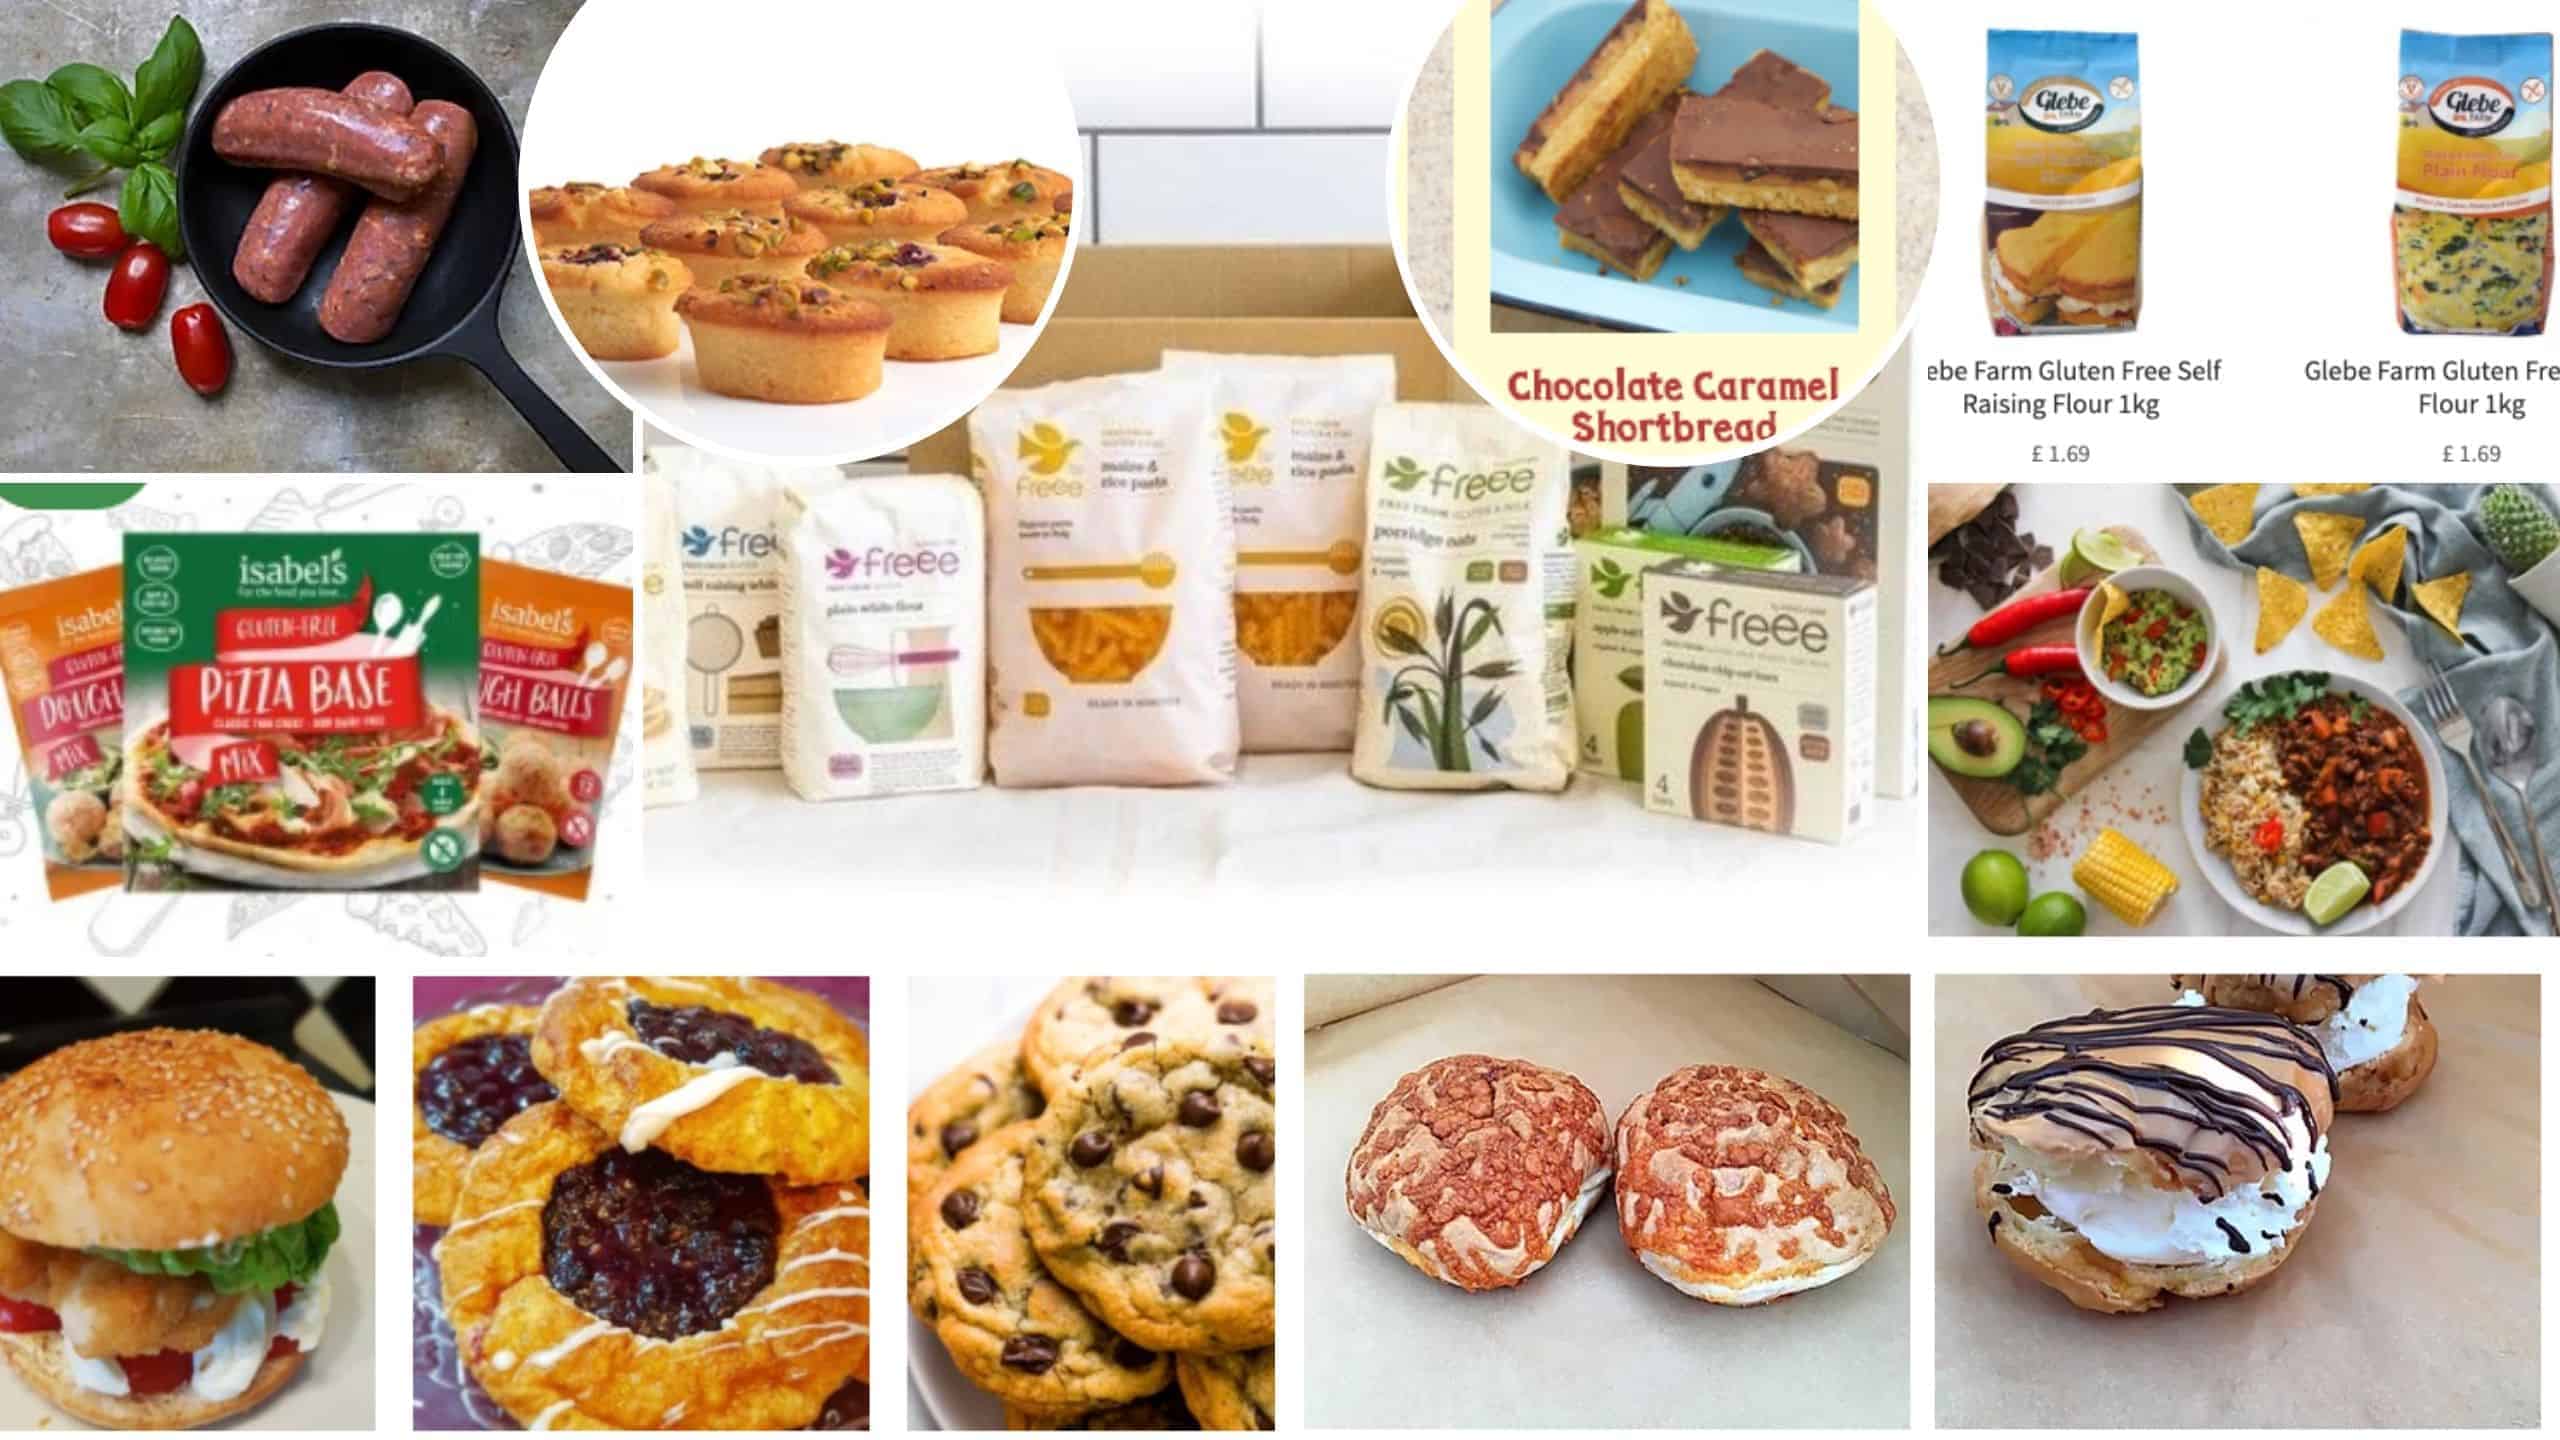 Where can you buy gluten free food online in the UK?